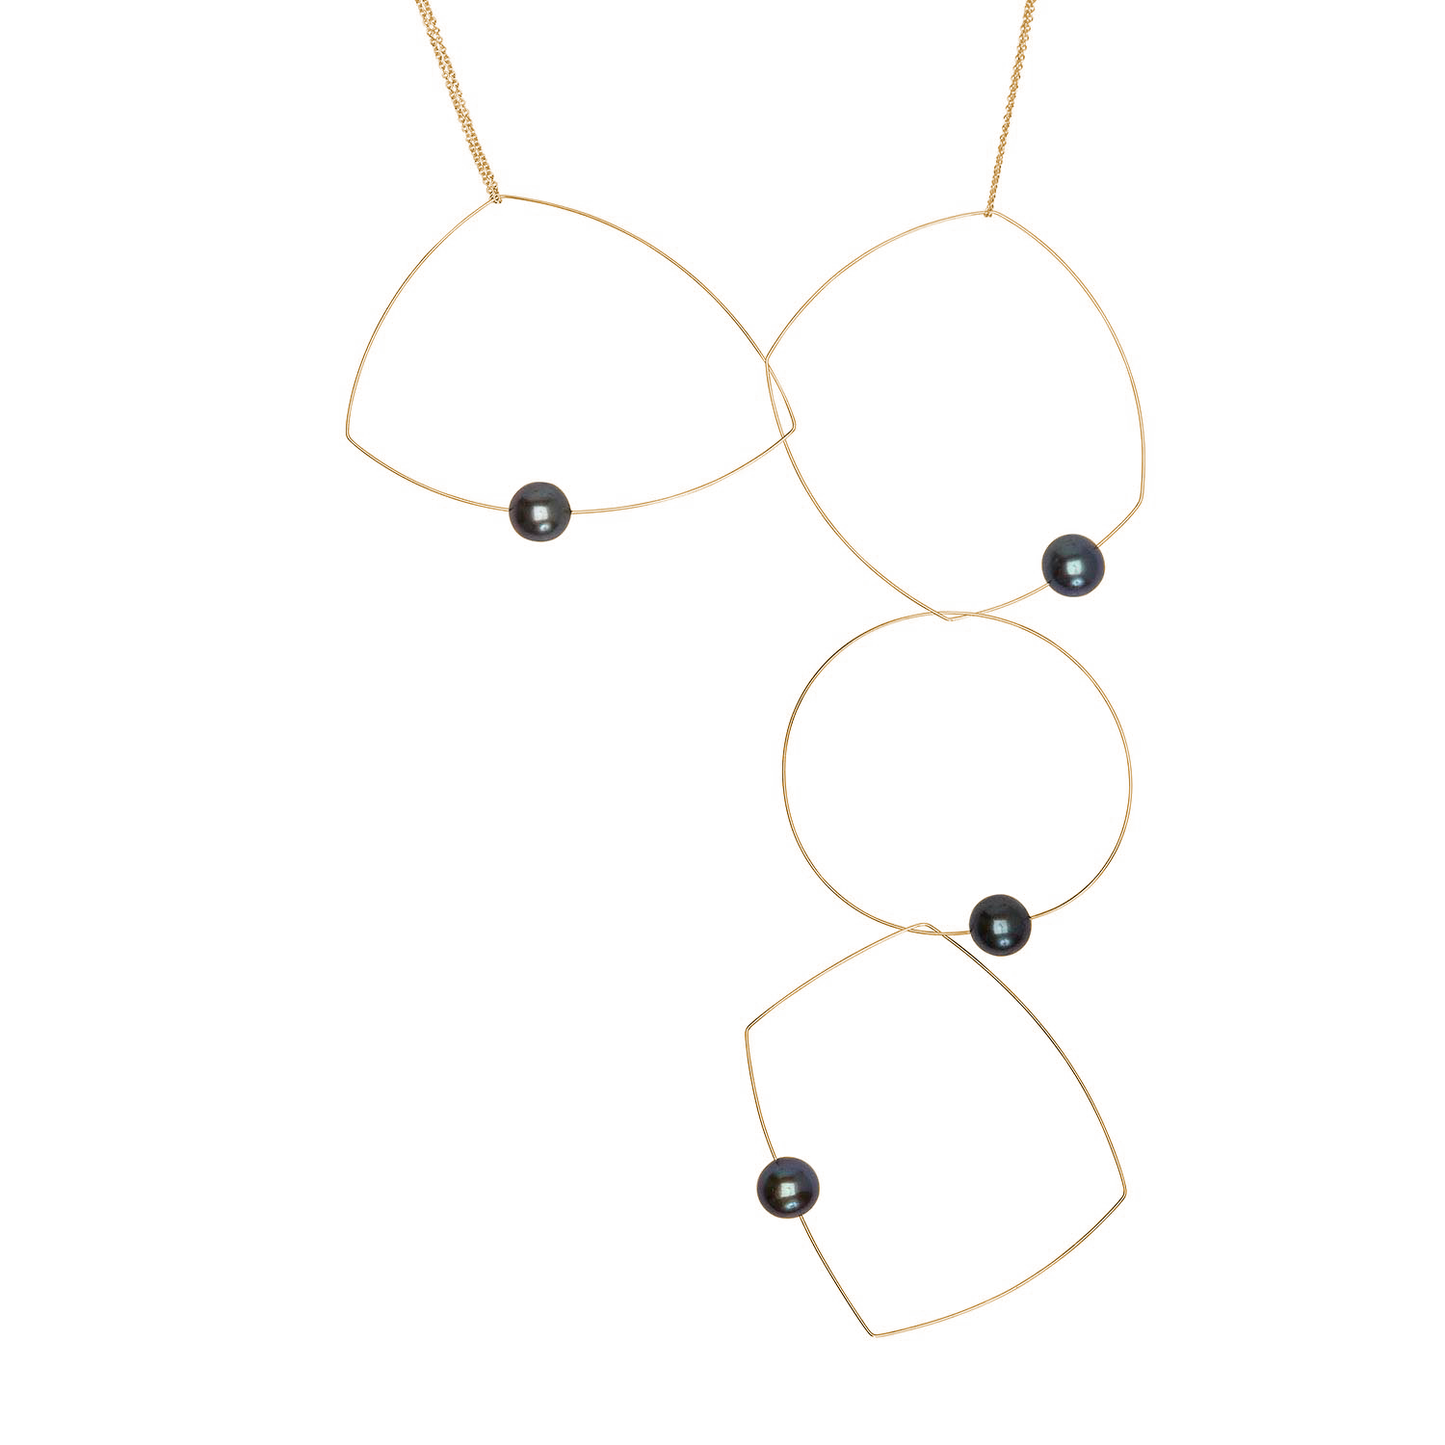 'Morph It!' Statement Necklace with Round Freshwater Pearls